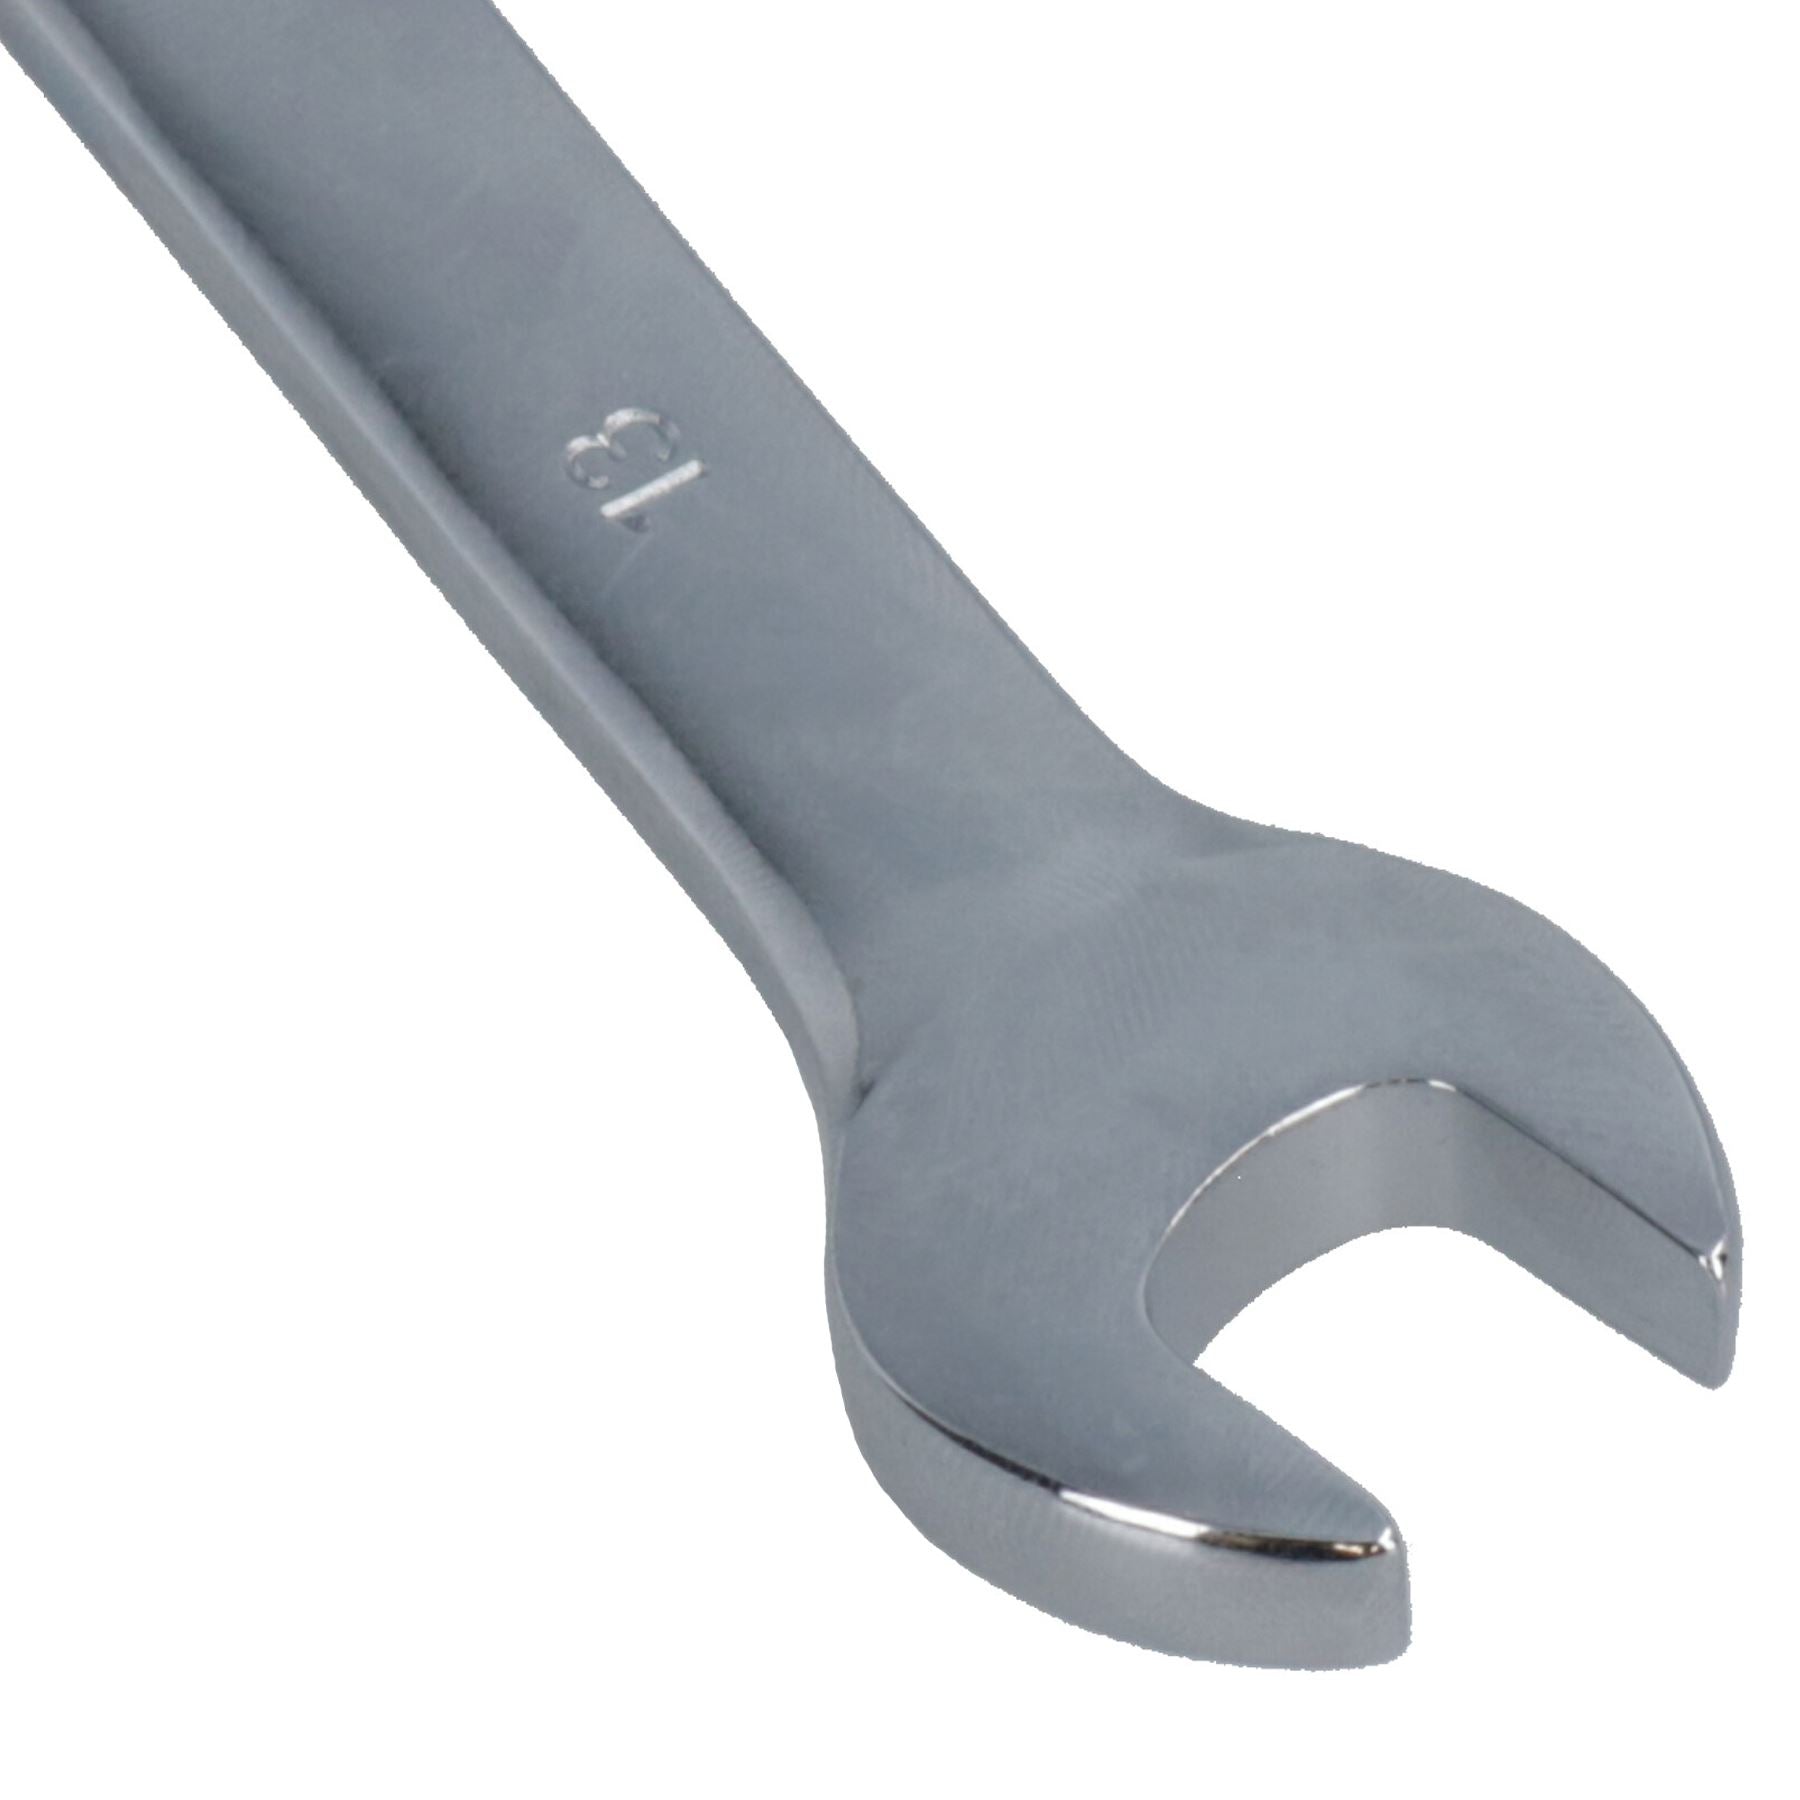 13mm Reversible Cranked Offset Ratchet Combination Spanner Wrench 72 Teeth